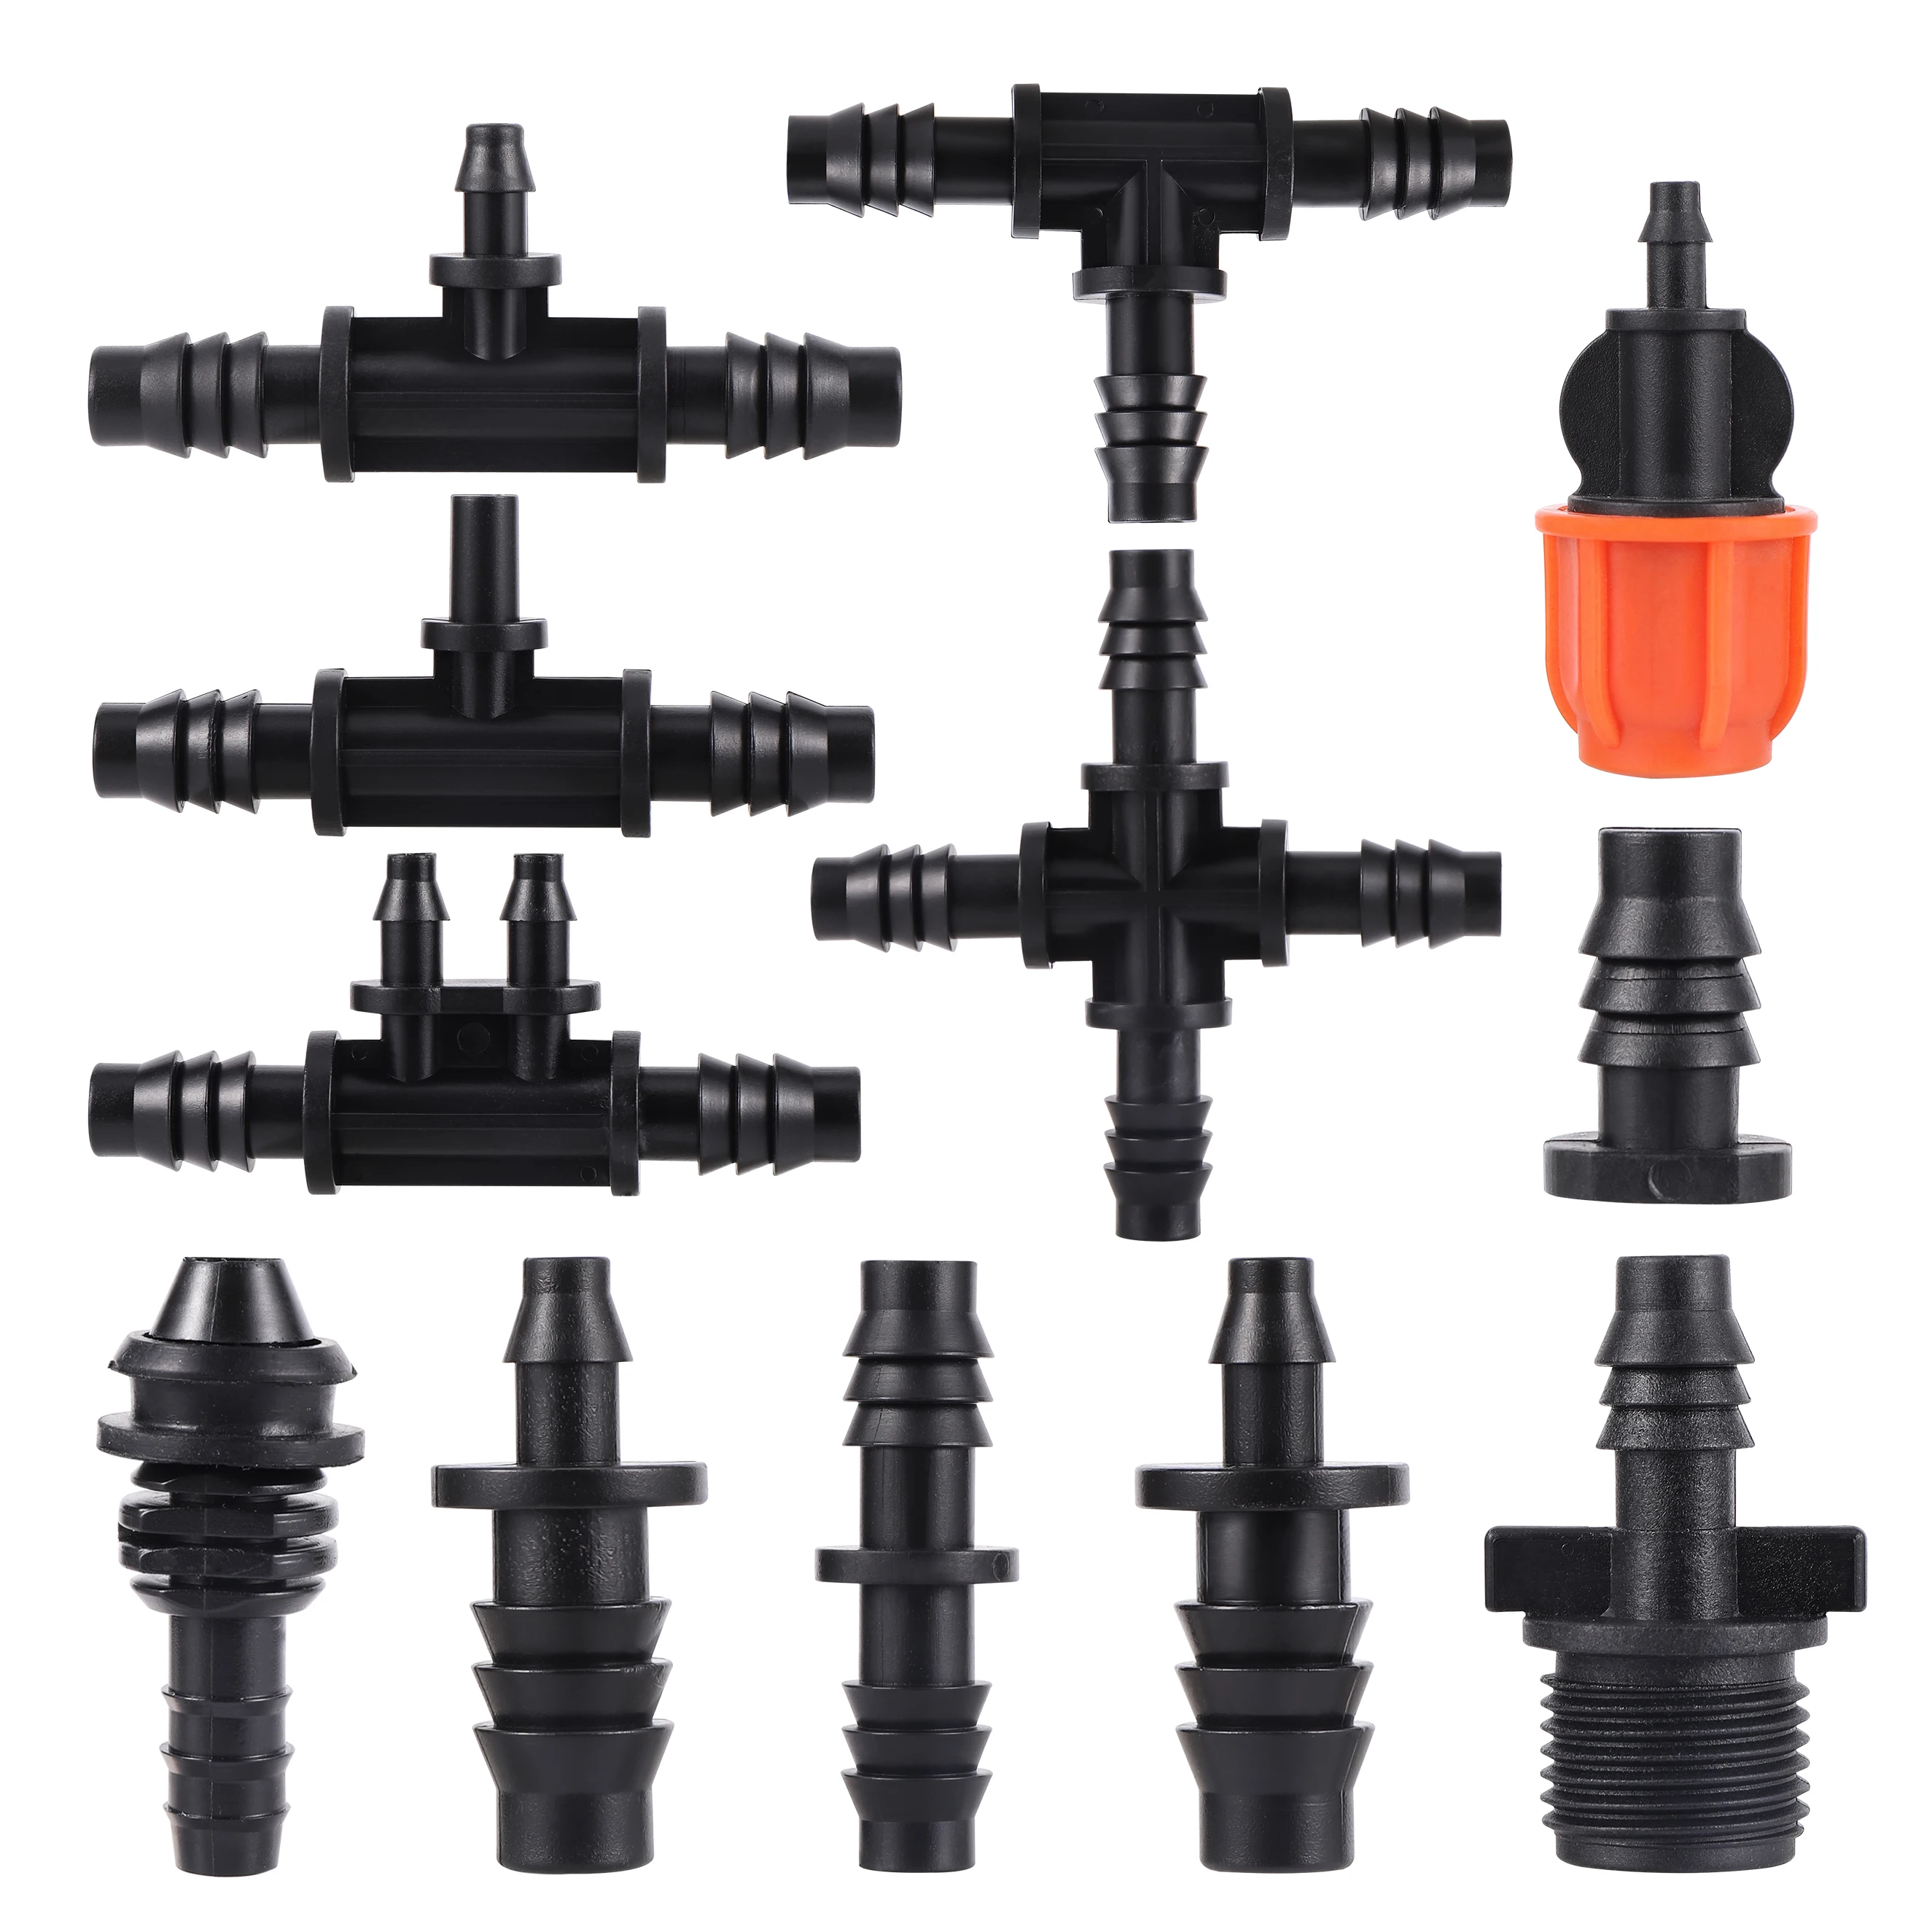 10pcs 8/11mm Garden Hose Irrigation Fittings 3 Way 4 Way 3/8" to 1/4 " Barbed Connector For Lawn, Agriculture And Drip Tubing